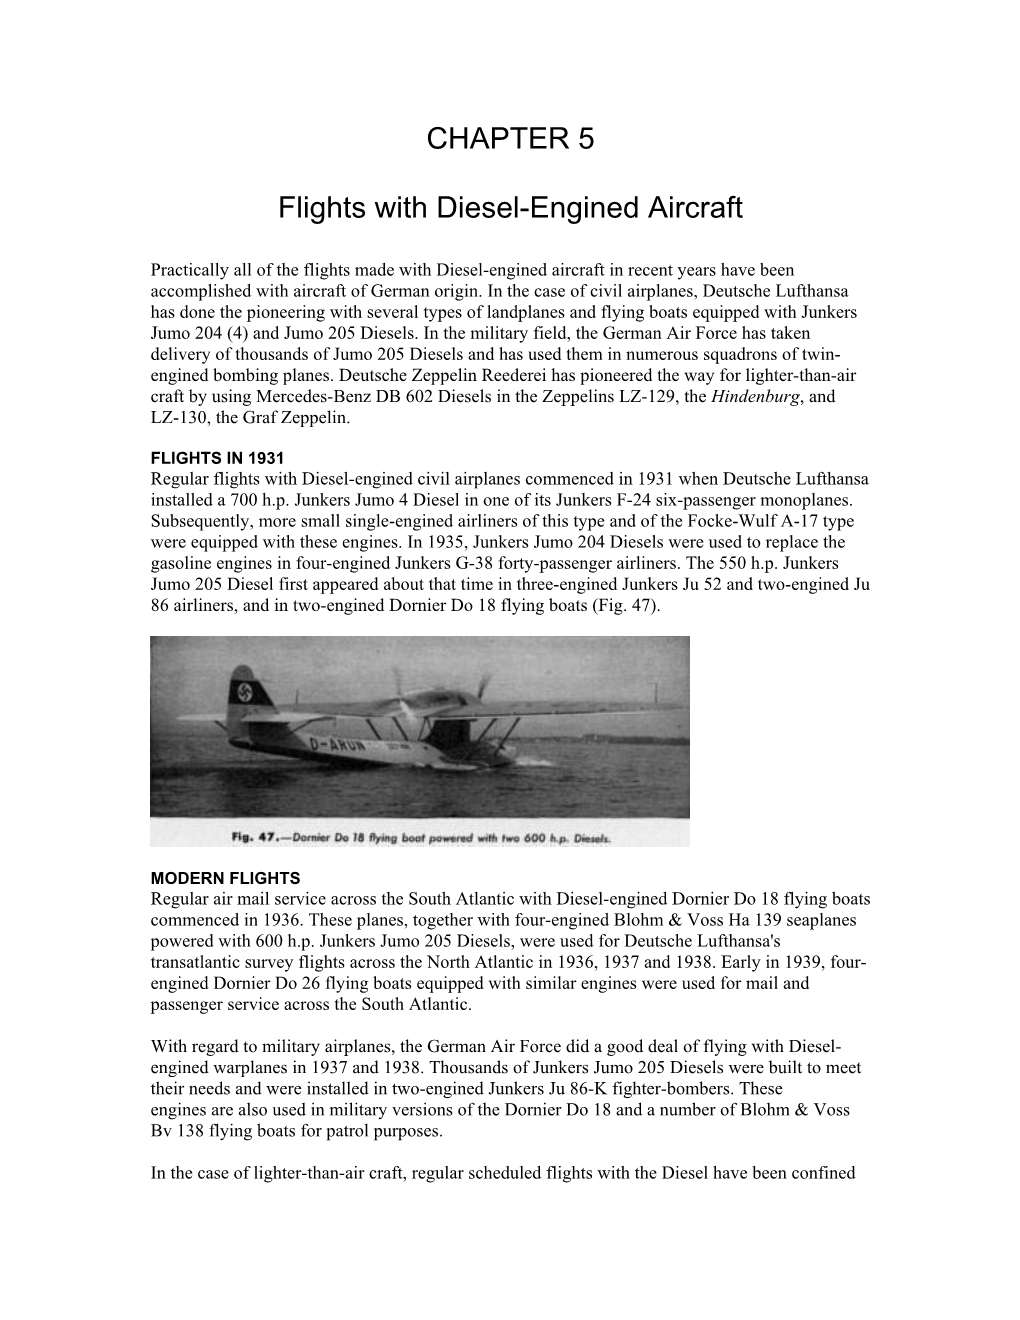 CHAPTER 5 Flights with Diesel-Engined Aircraft